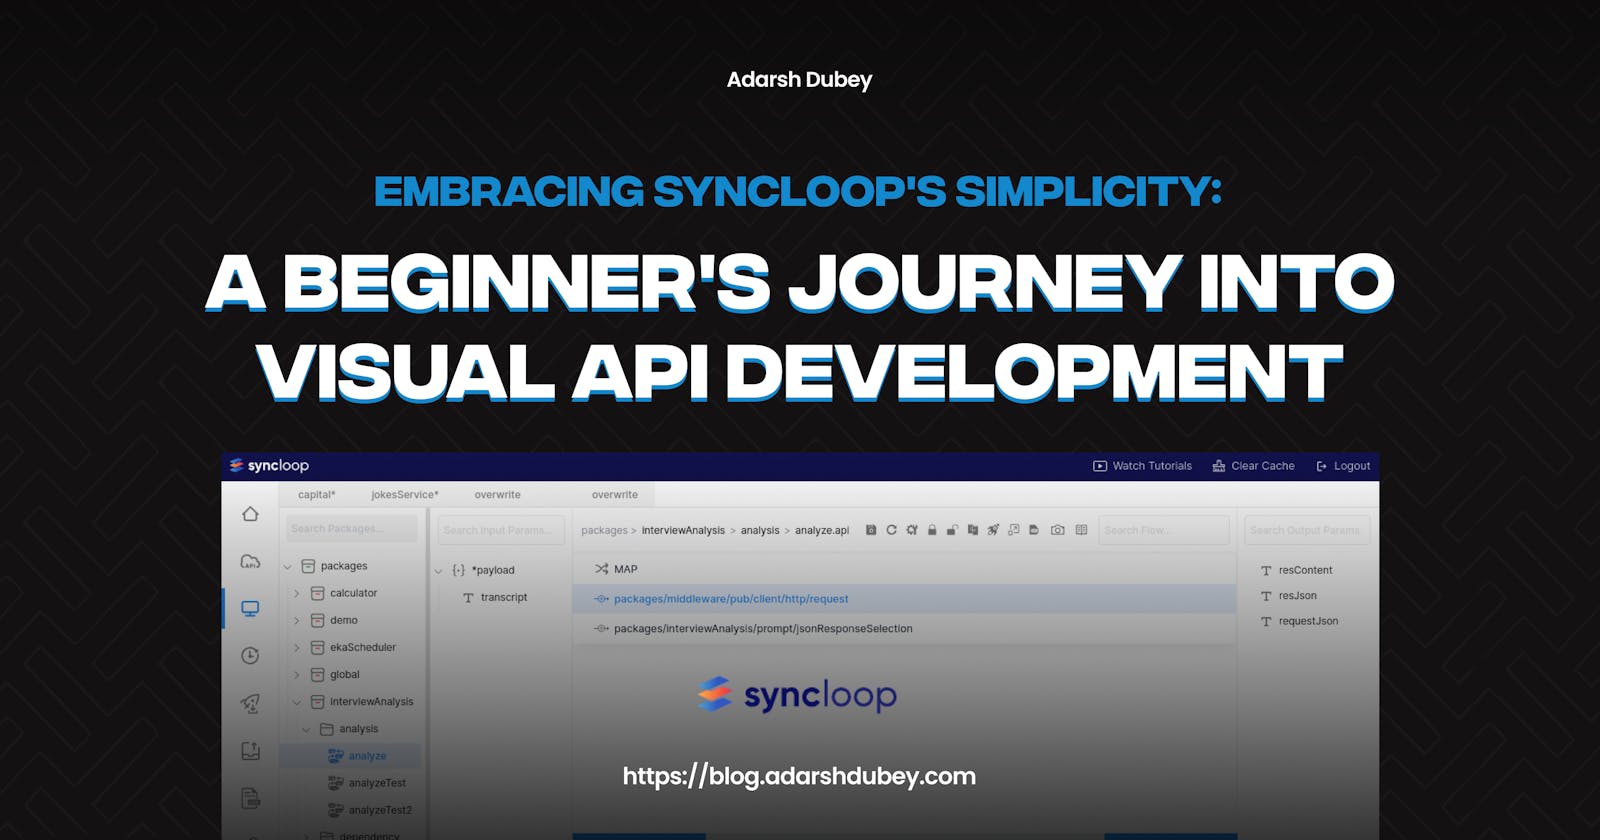 Embracing Syncloop's Simplicity: A Beginner's Journey into Visual API Development